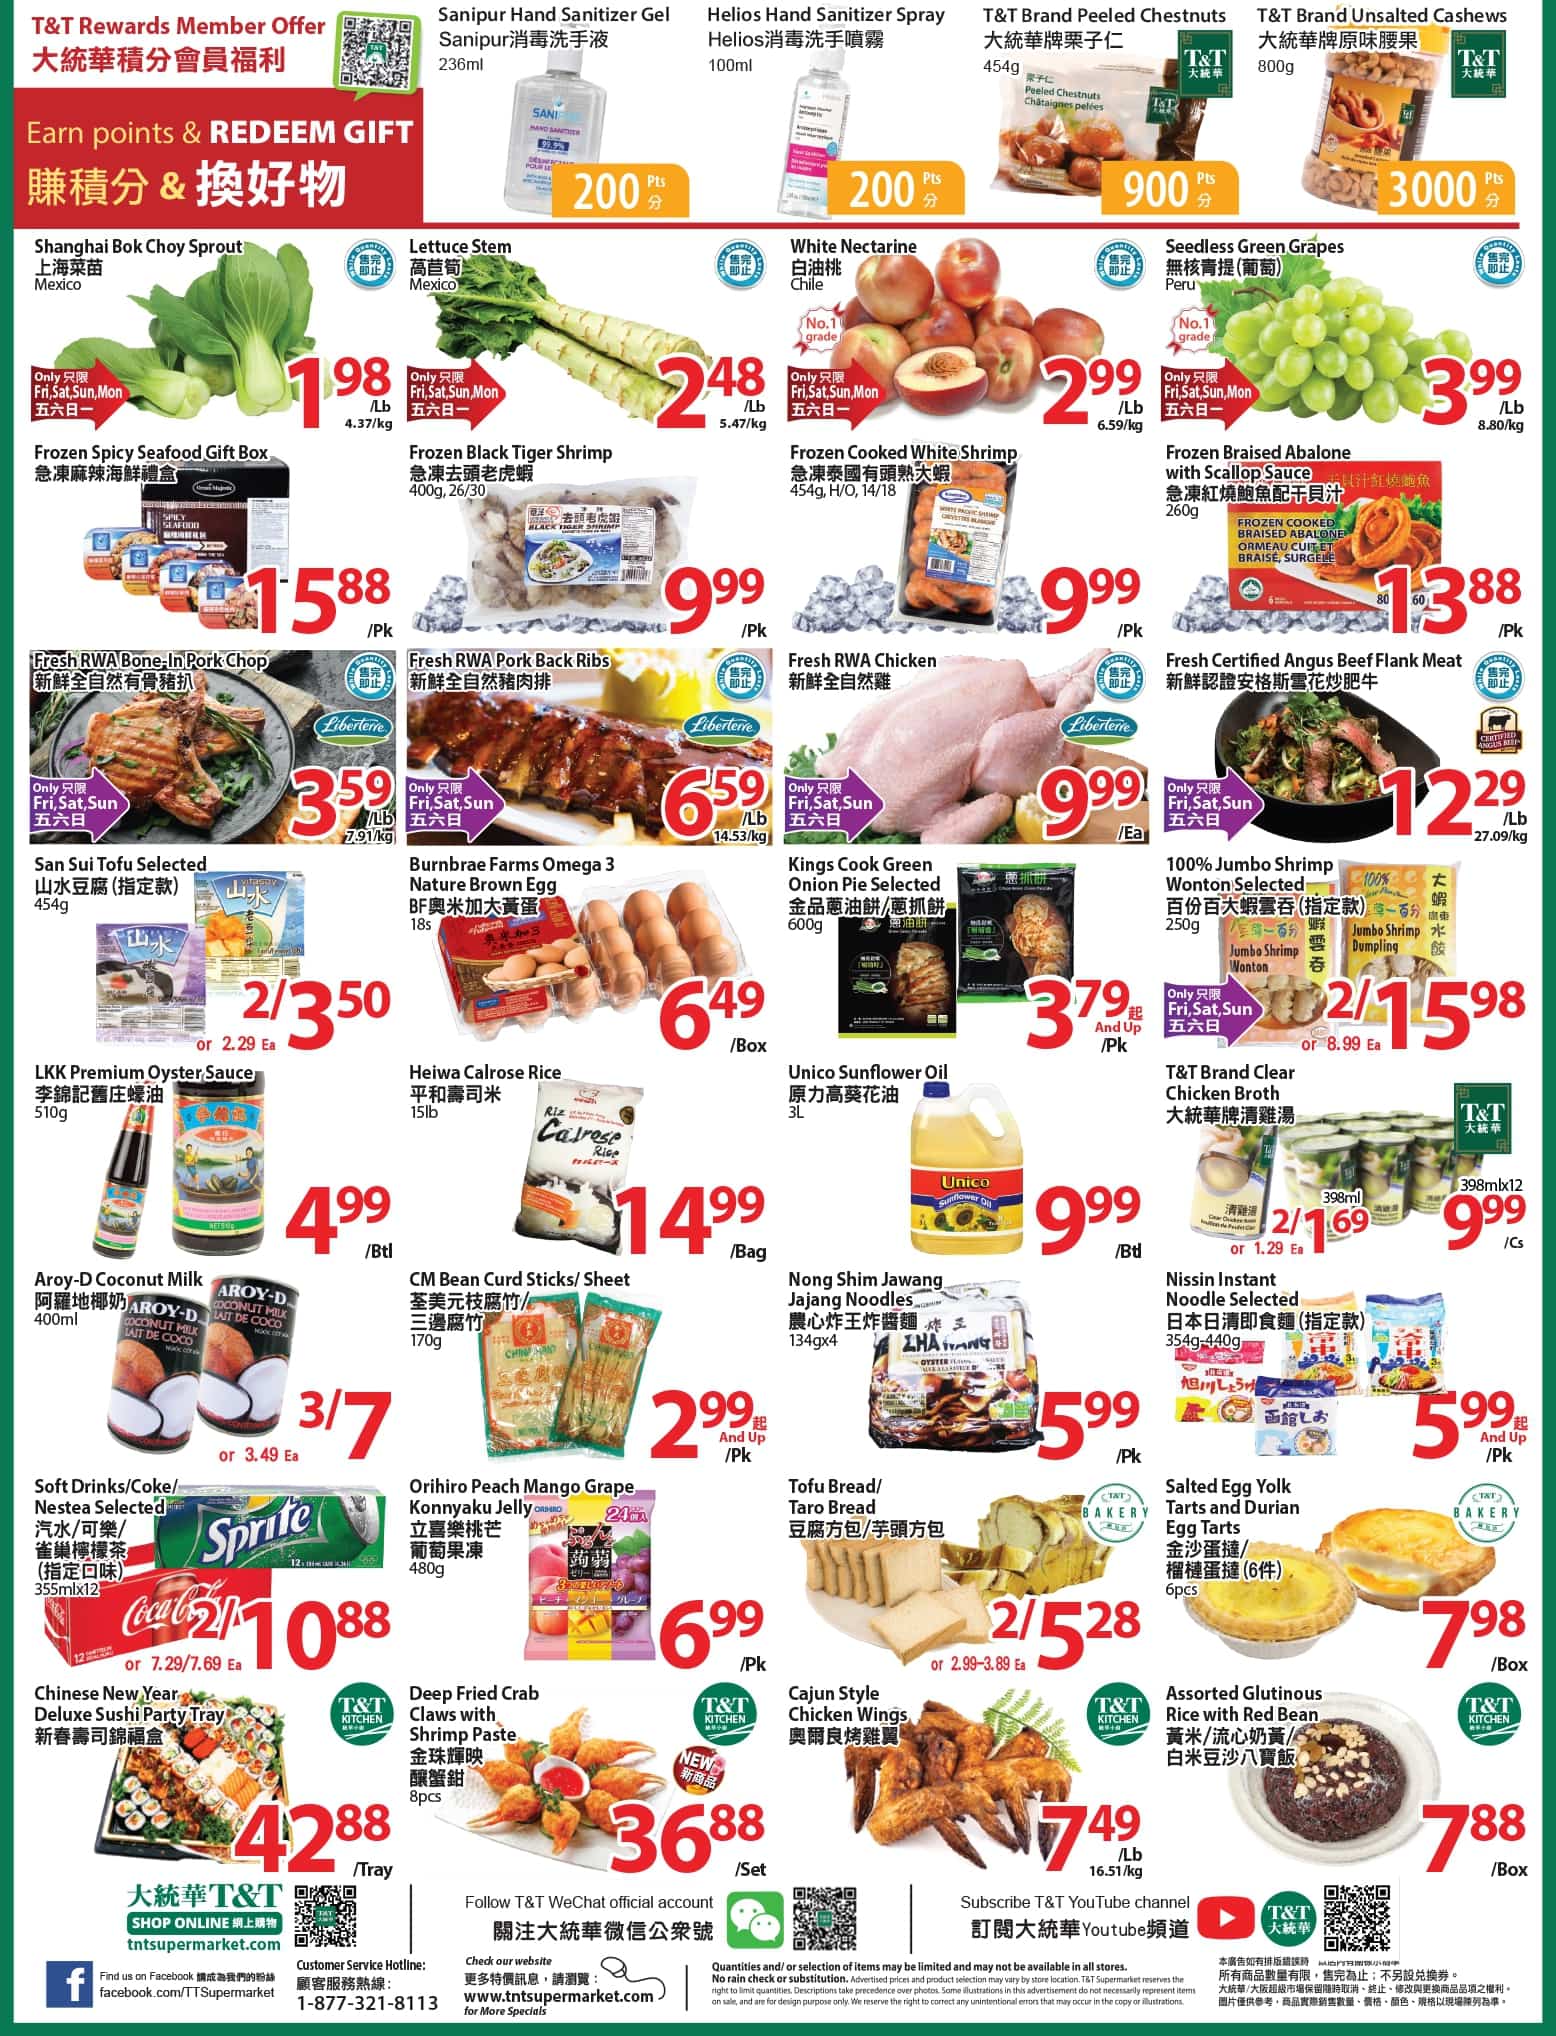 T & T Supermarket - Weekly Flyer Specials - Page 2